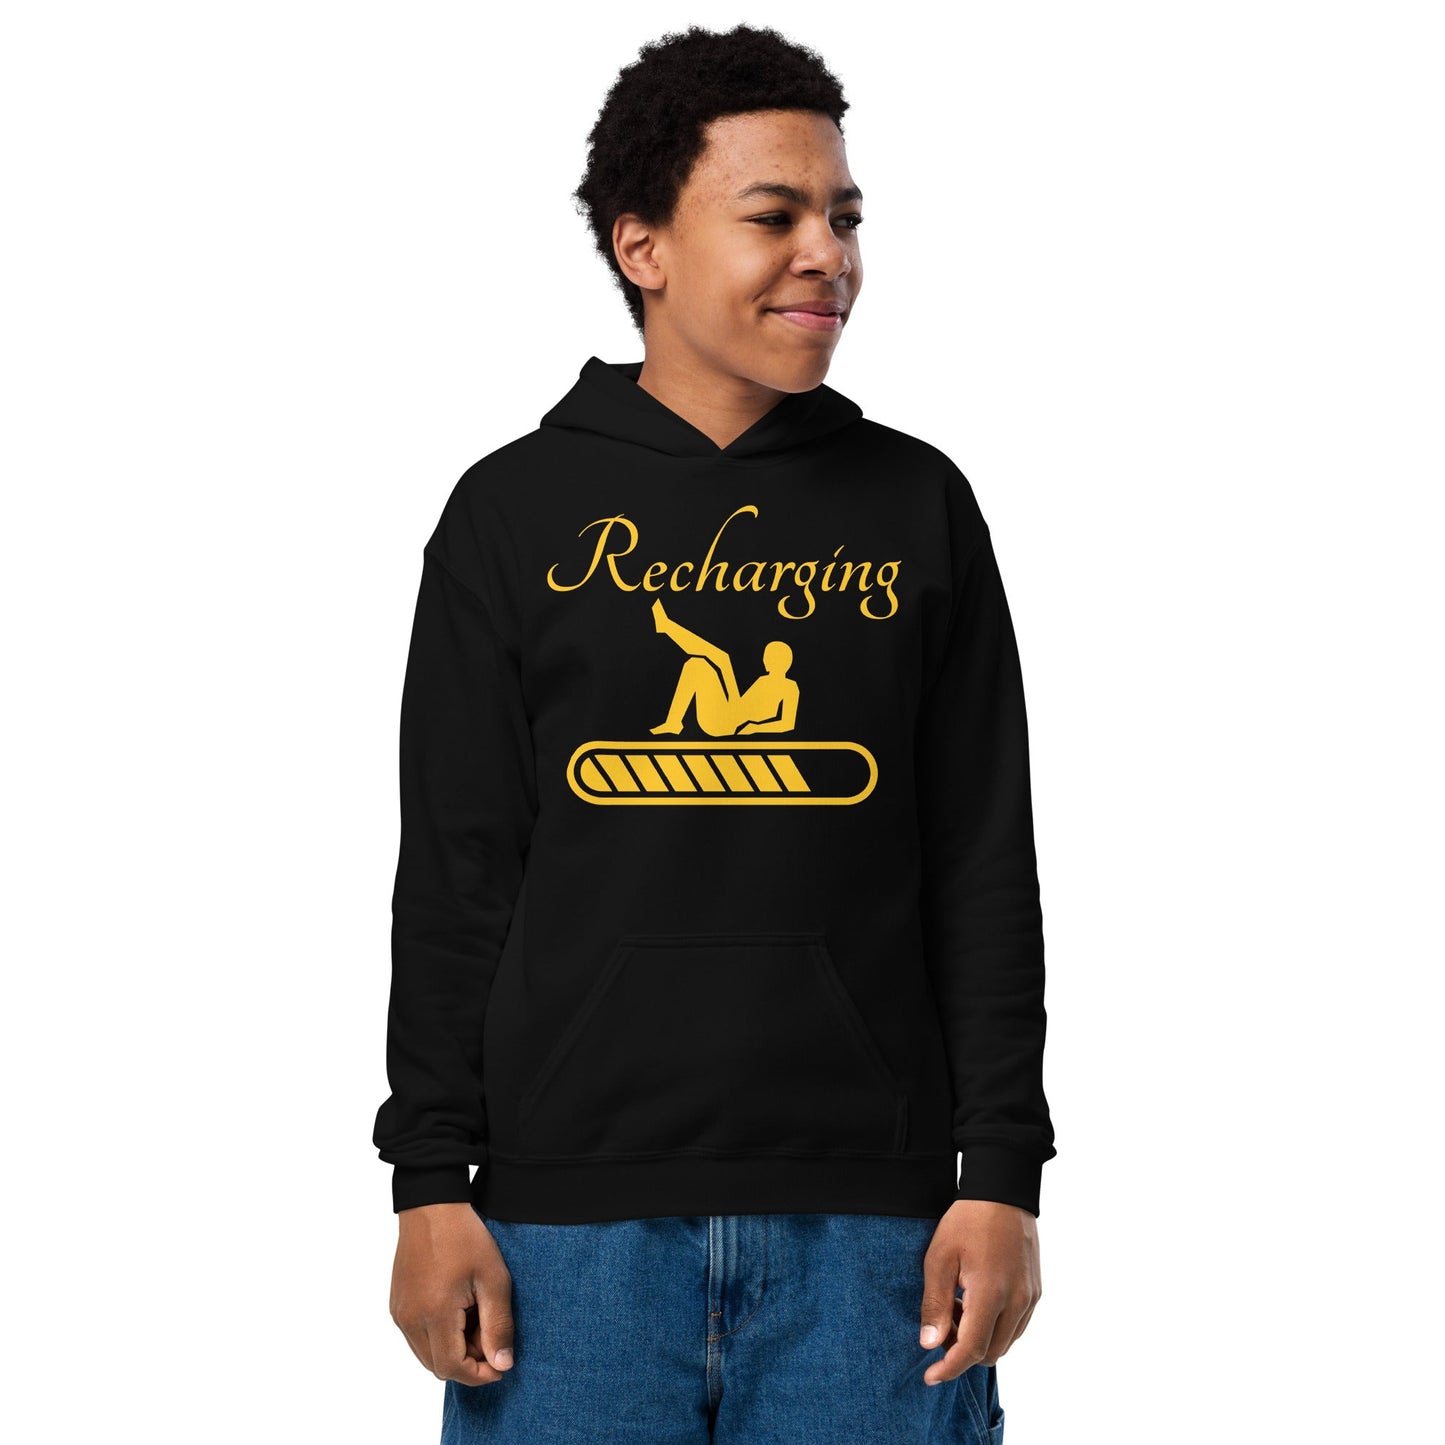 Recharging Youth heavy blend hoodie - Weirdly Sensational